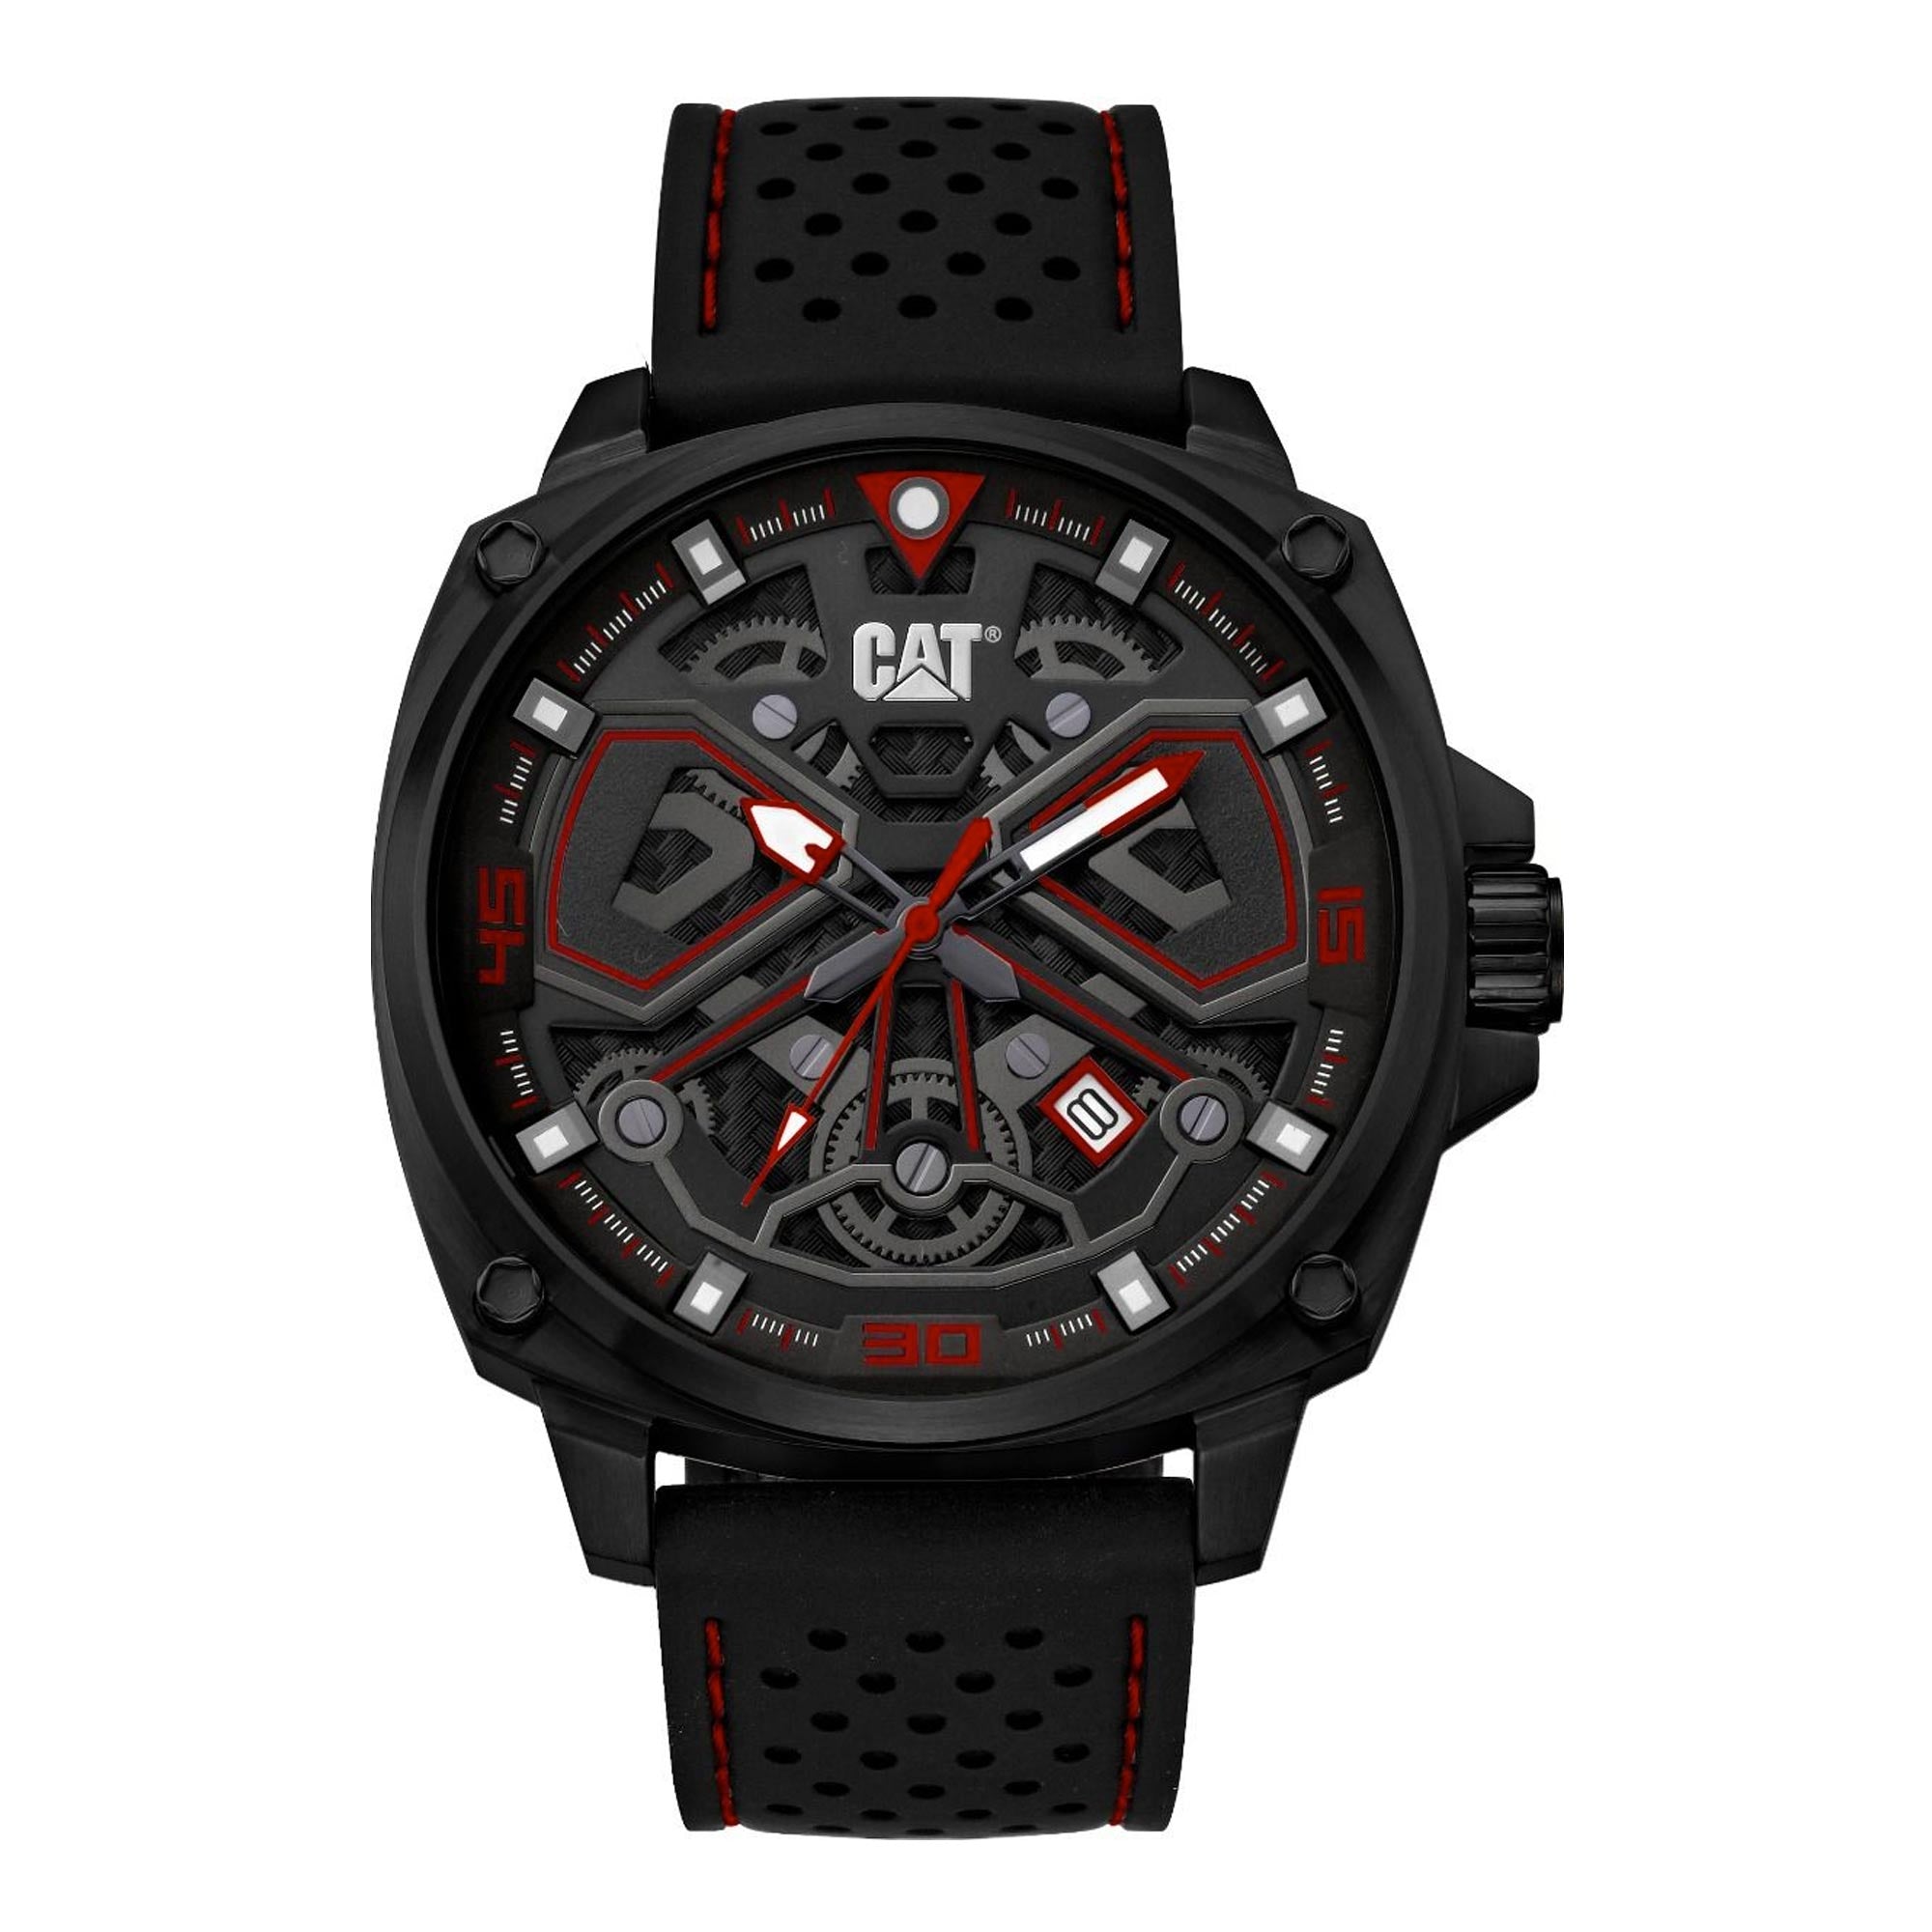 CAT AJ Watch - Black/Red with Silicone Strap + FREE STICKER PACK